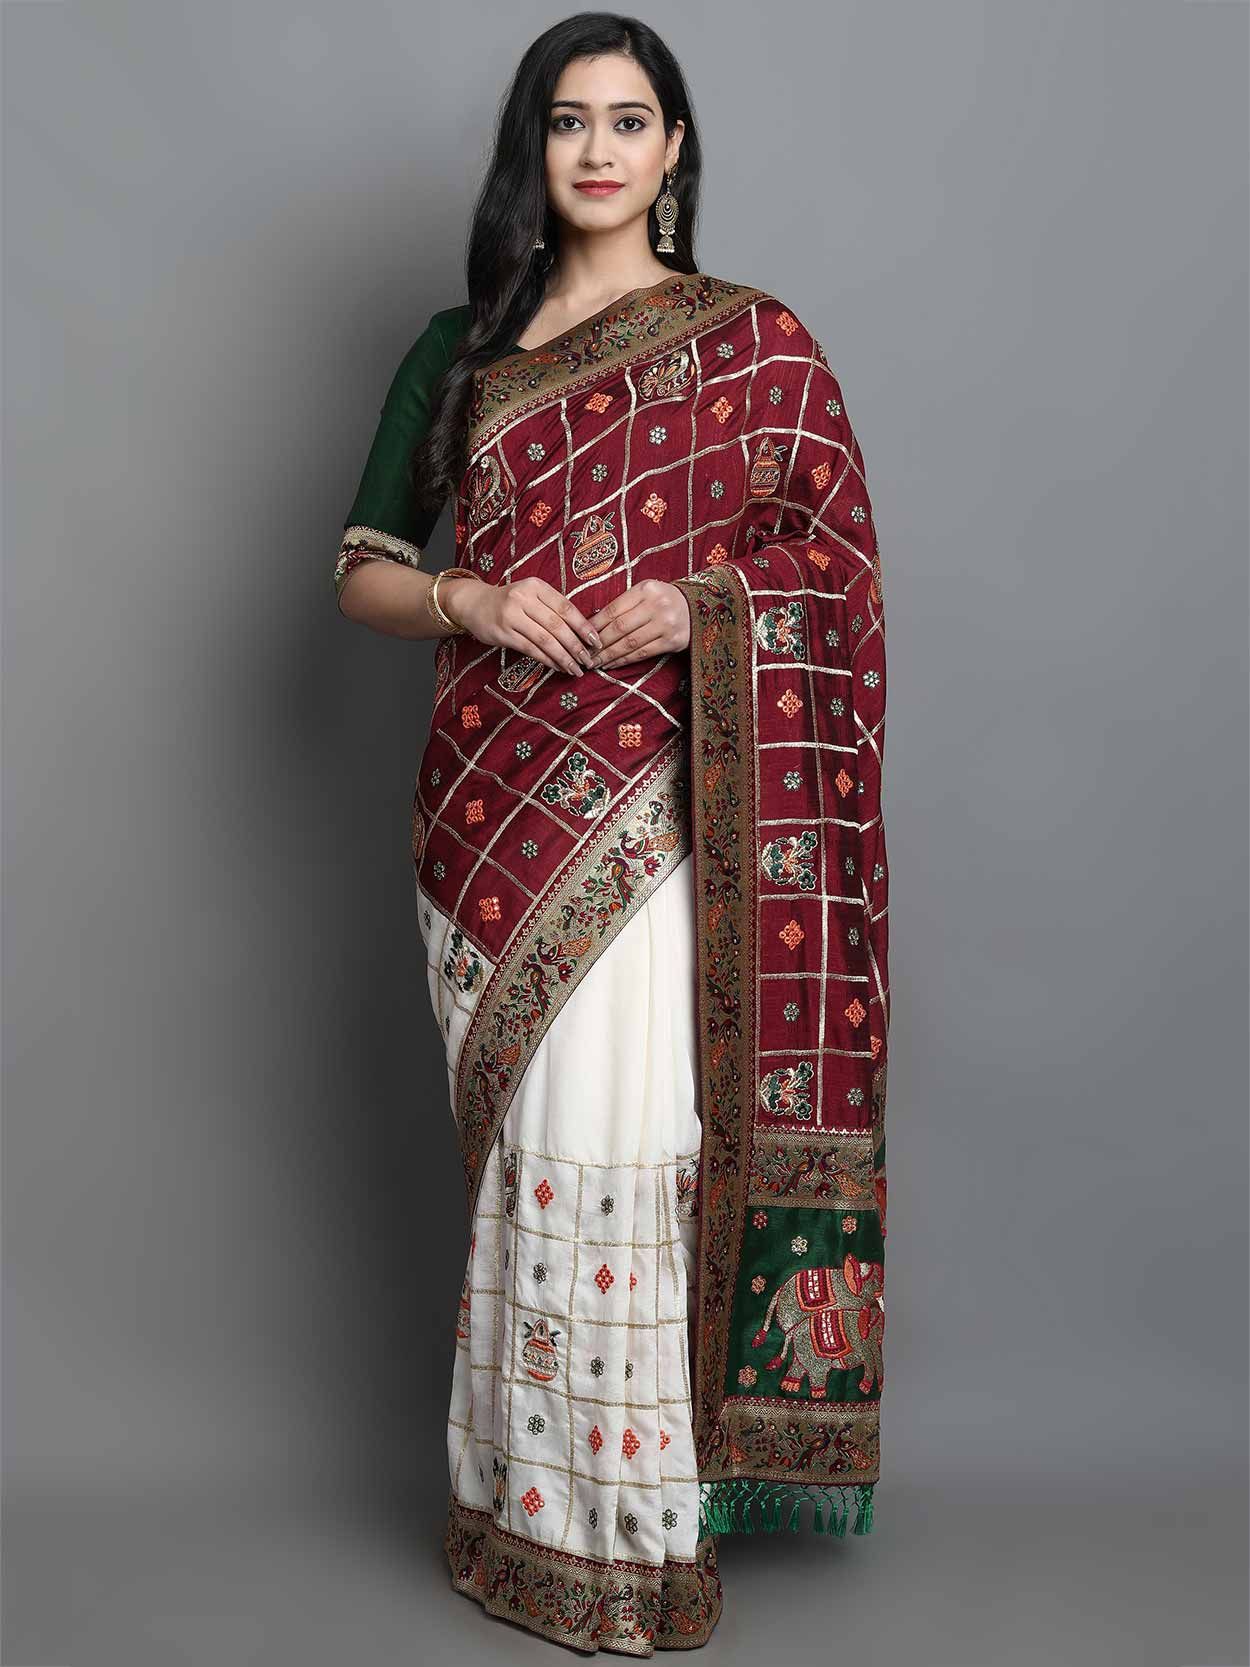 Synthetic Sarees - Buy Synthetic Sarees Online Starting at Just ₹189 |  Meesho